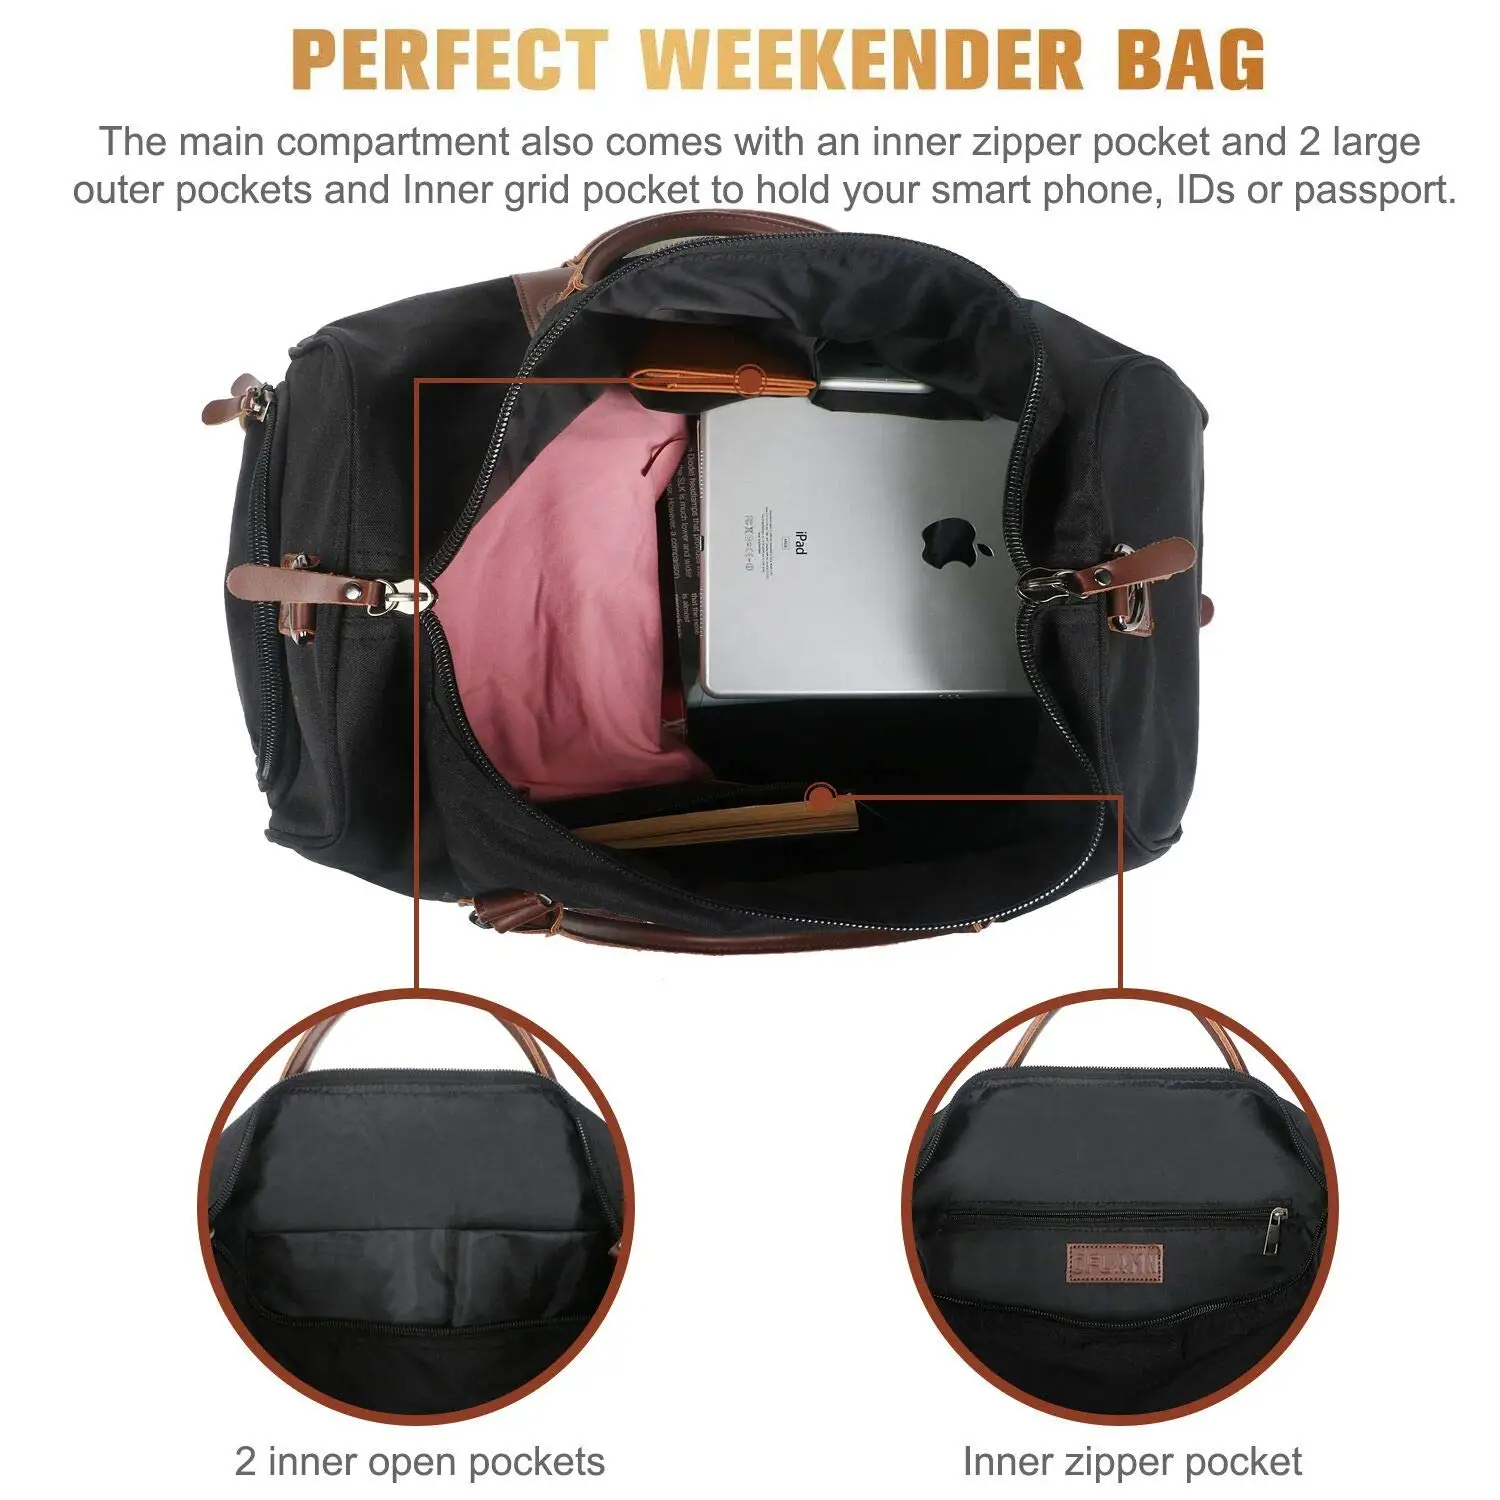 Duffle Bag for Men Canvas Weekender Overnight Bag Large Size Luggage Travel Bag Carry On With Shoe Compartment and Toiletry